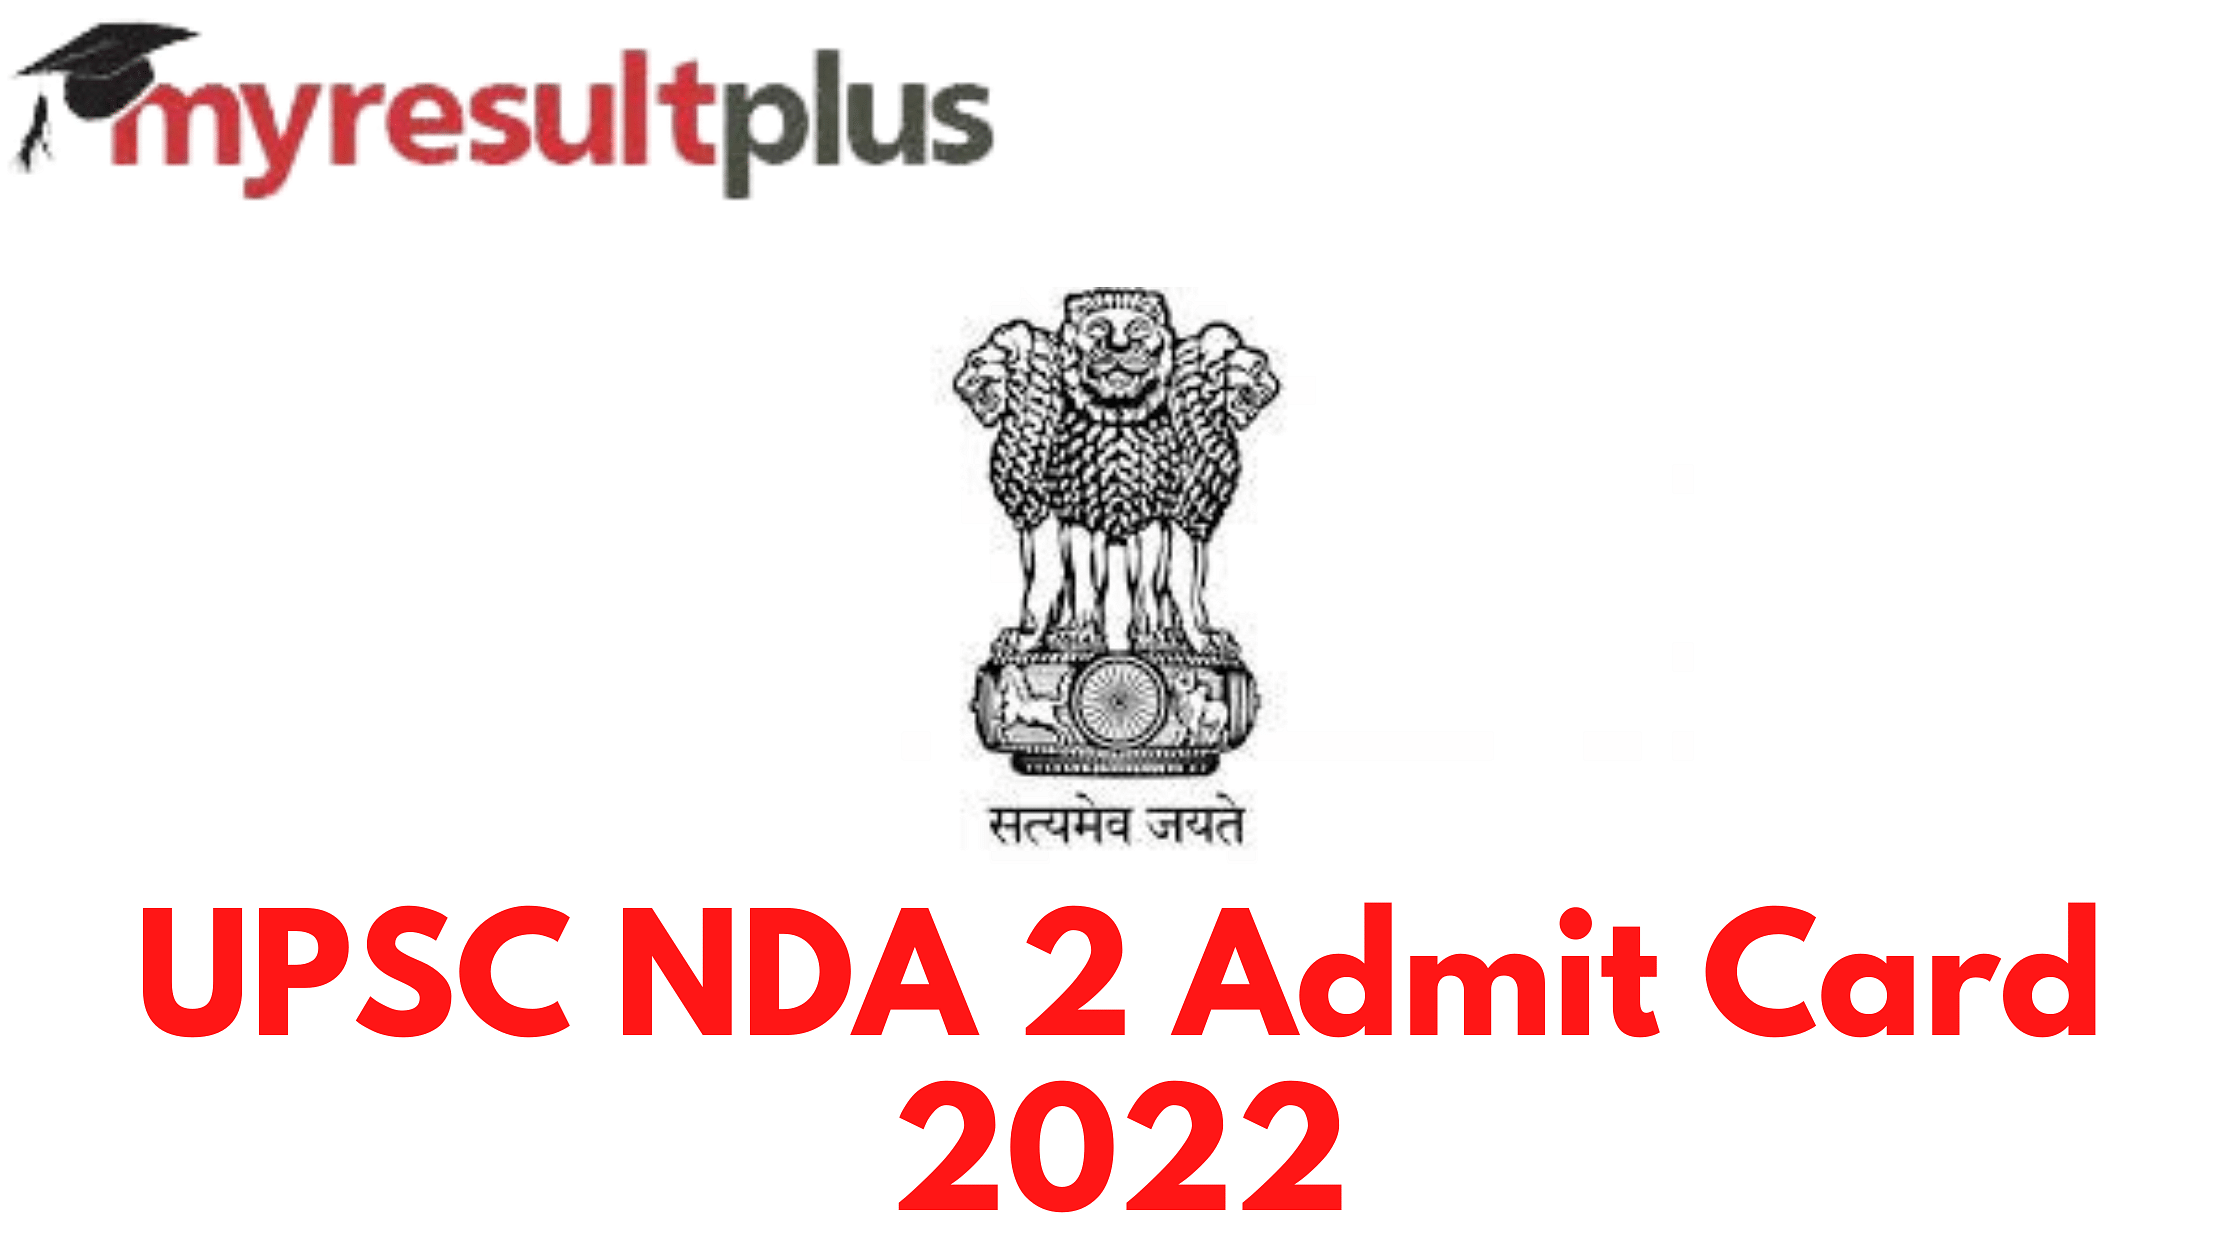 UPSC NDA 2 2022 Admit Card Out, Here's Direct Link to Download